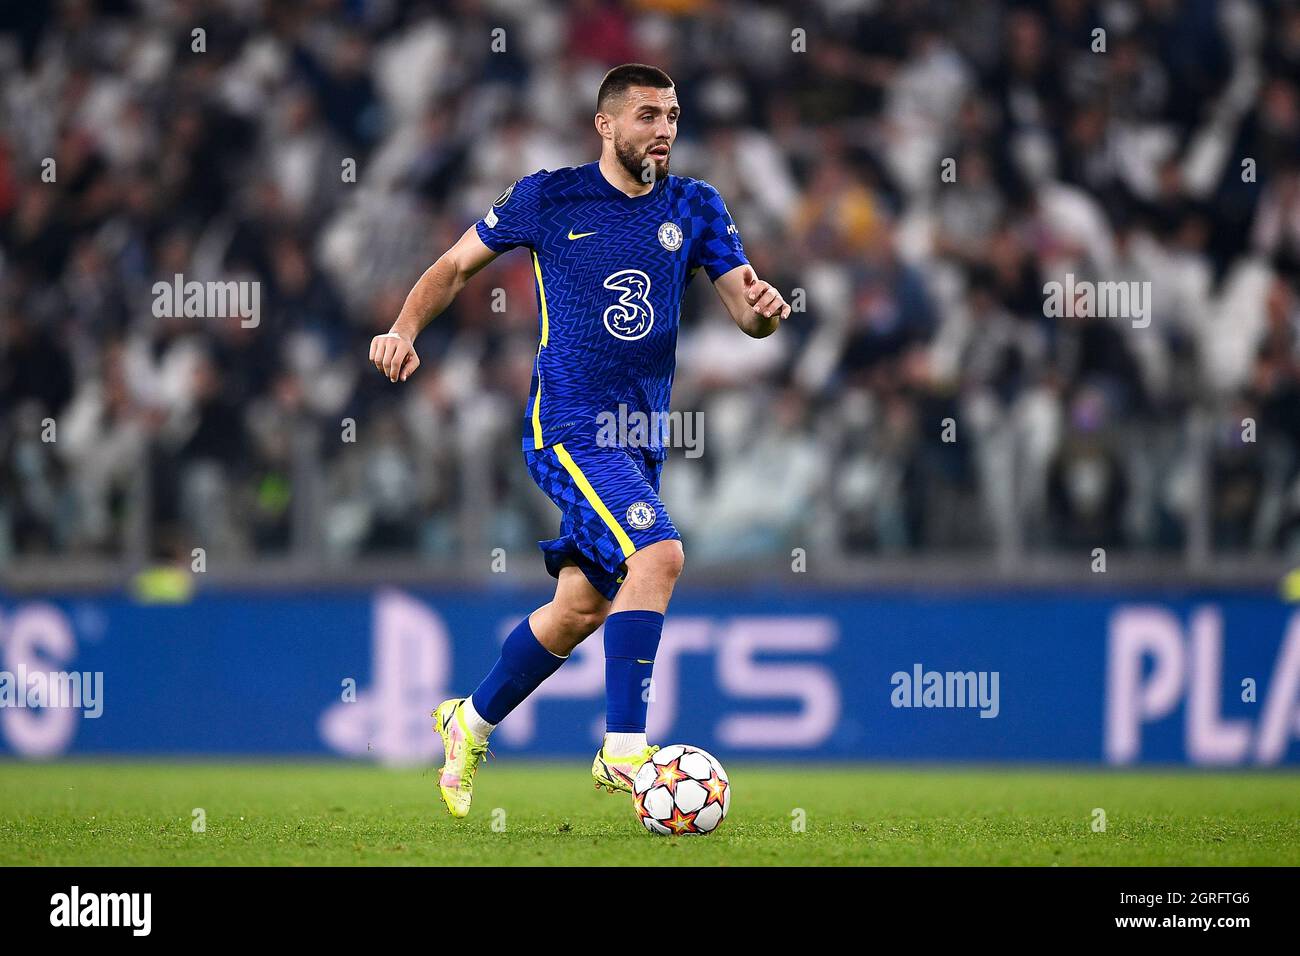 Turin, Italy. 29 September 2021. Mateo Kovacic of Chelsea FC in action during the UEFA Champions League football match between Juventus FC and Chelsea FC. Credit: Nicolò Campo/Alamy Live News Stock Photo